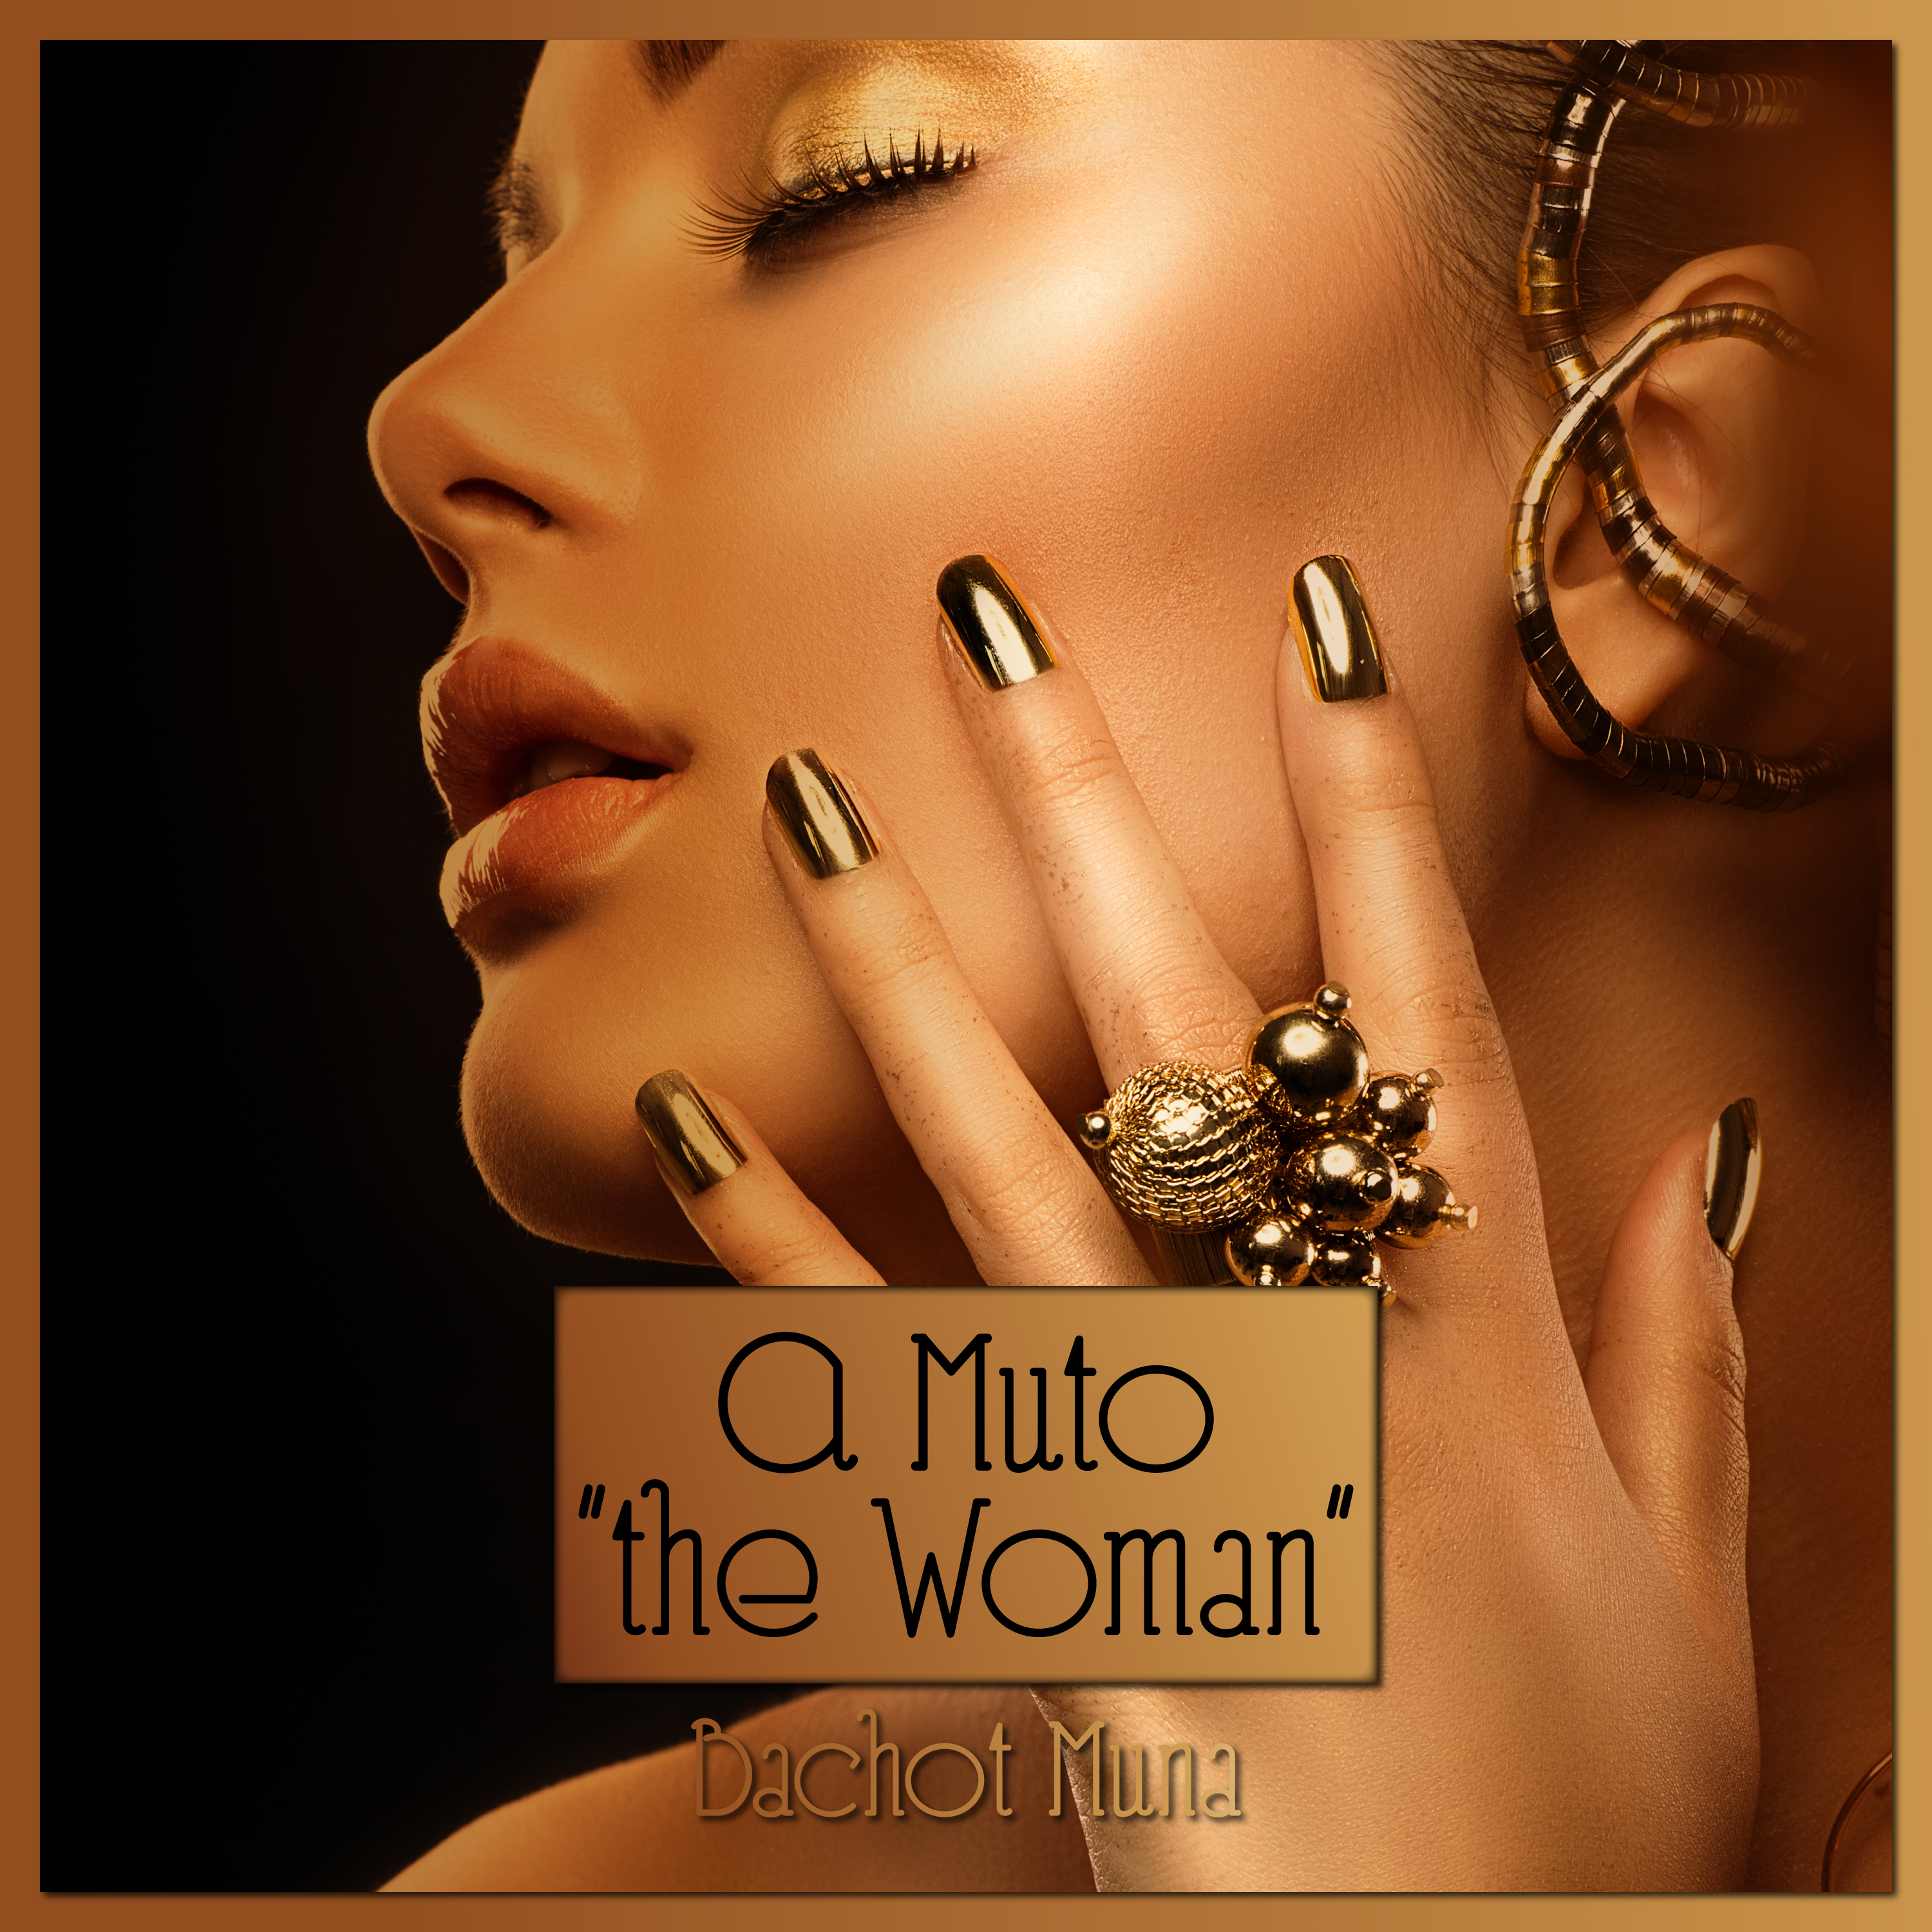 A muto_the woman